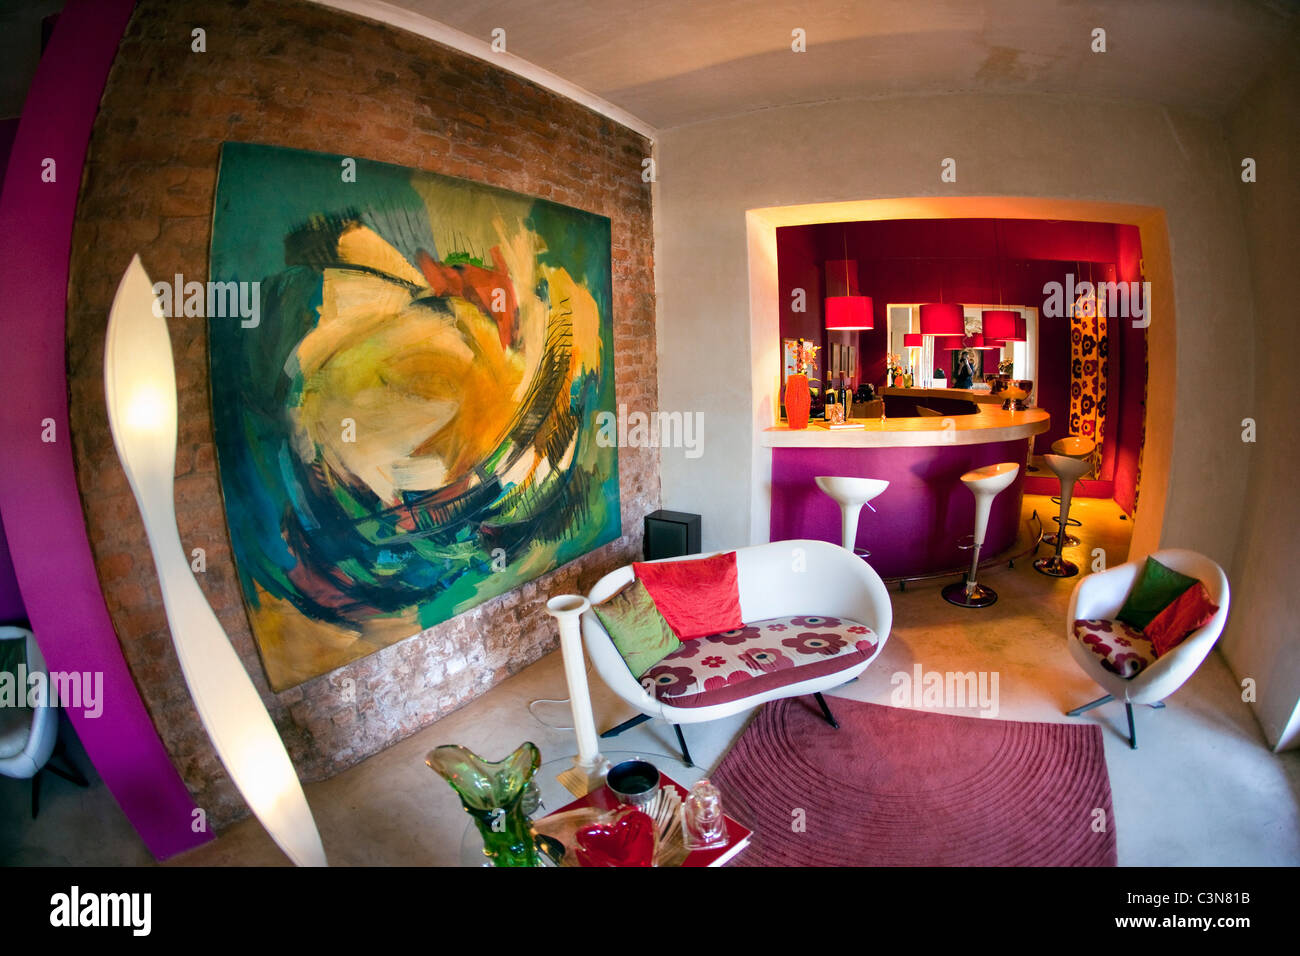 South Africa, Western Cape, Barrydale, The Barrydale Karoo Hotel. Bar and lobby. Stock Photo